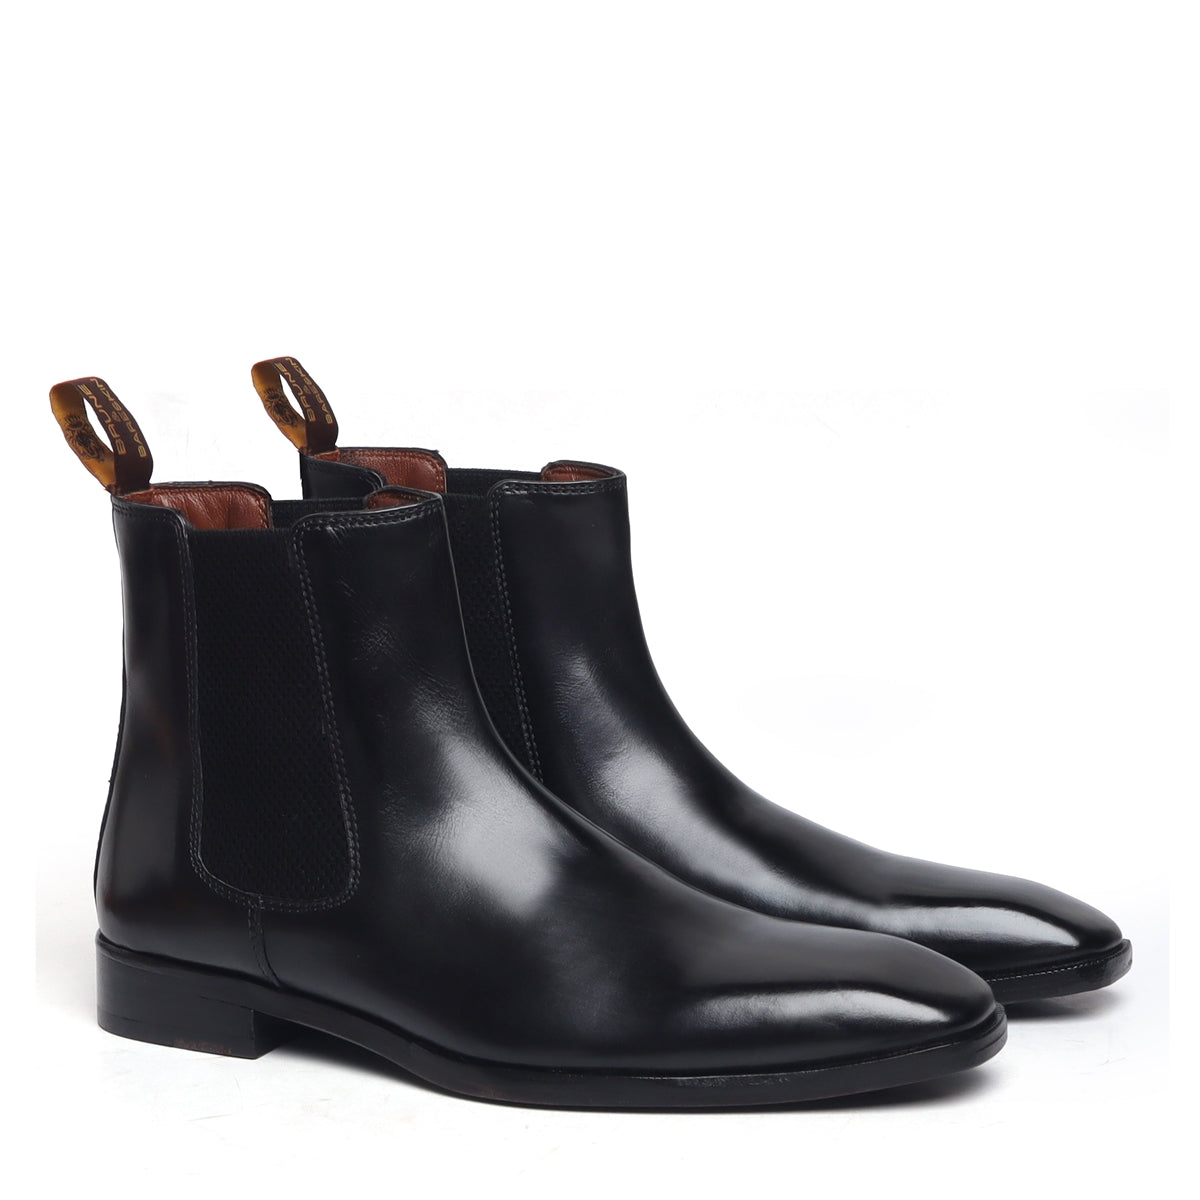 Black Chelsea Boots With Leather Sole